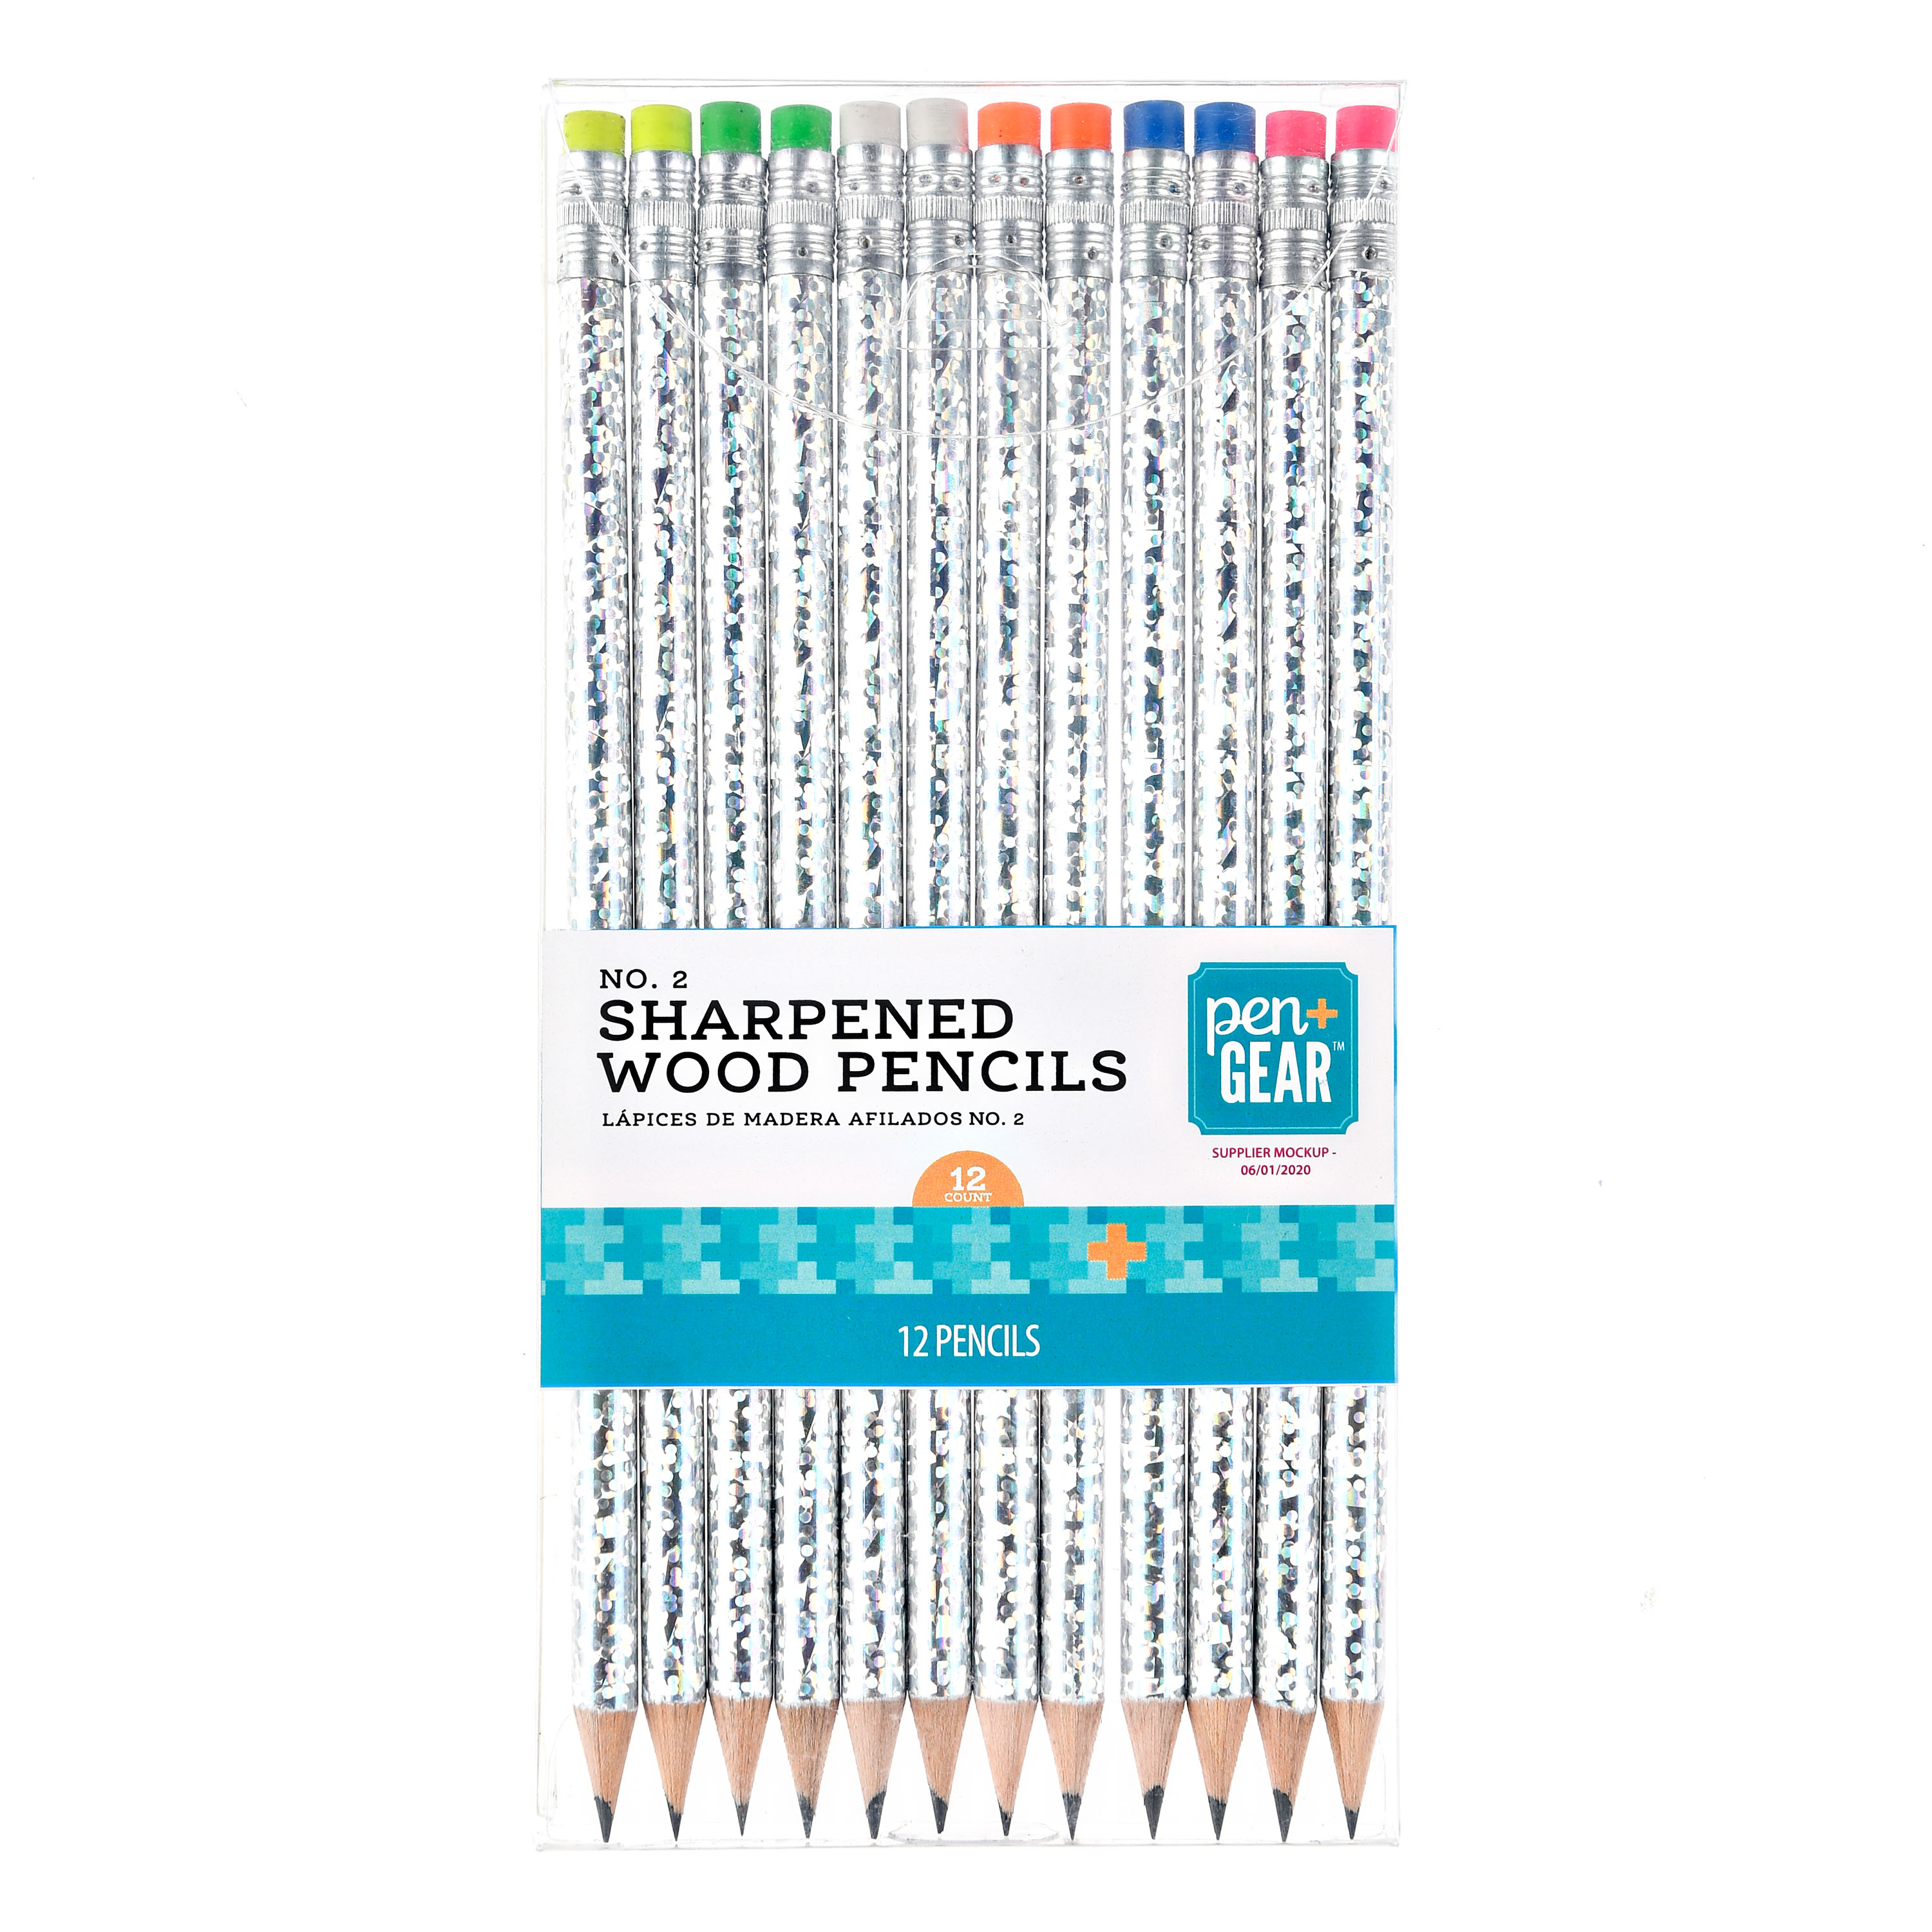 Pen + Gear No. 2 Wood Pencils, Holographic, Sharpened, 12 Count - image 1 of 5